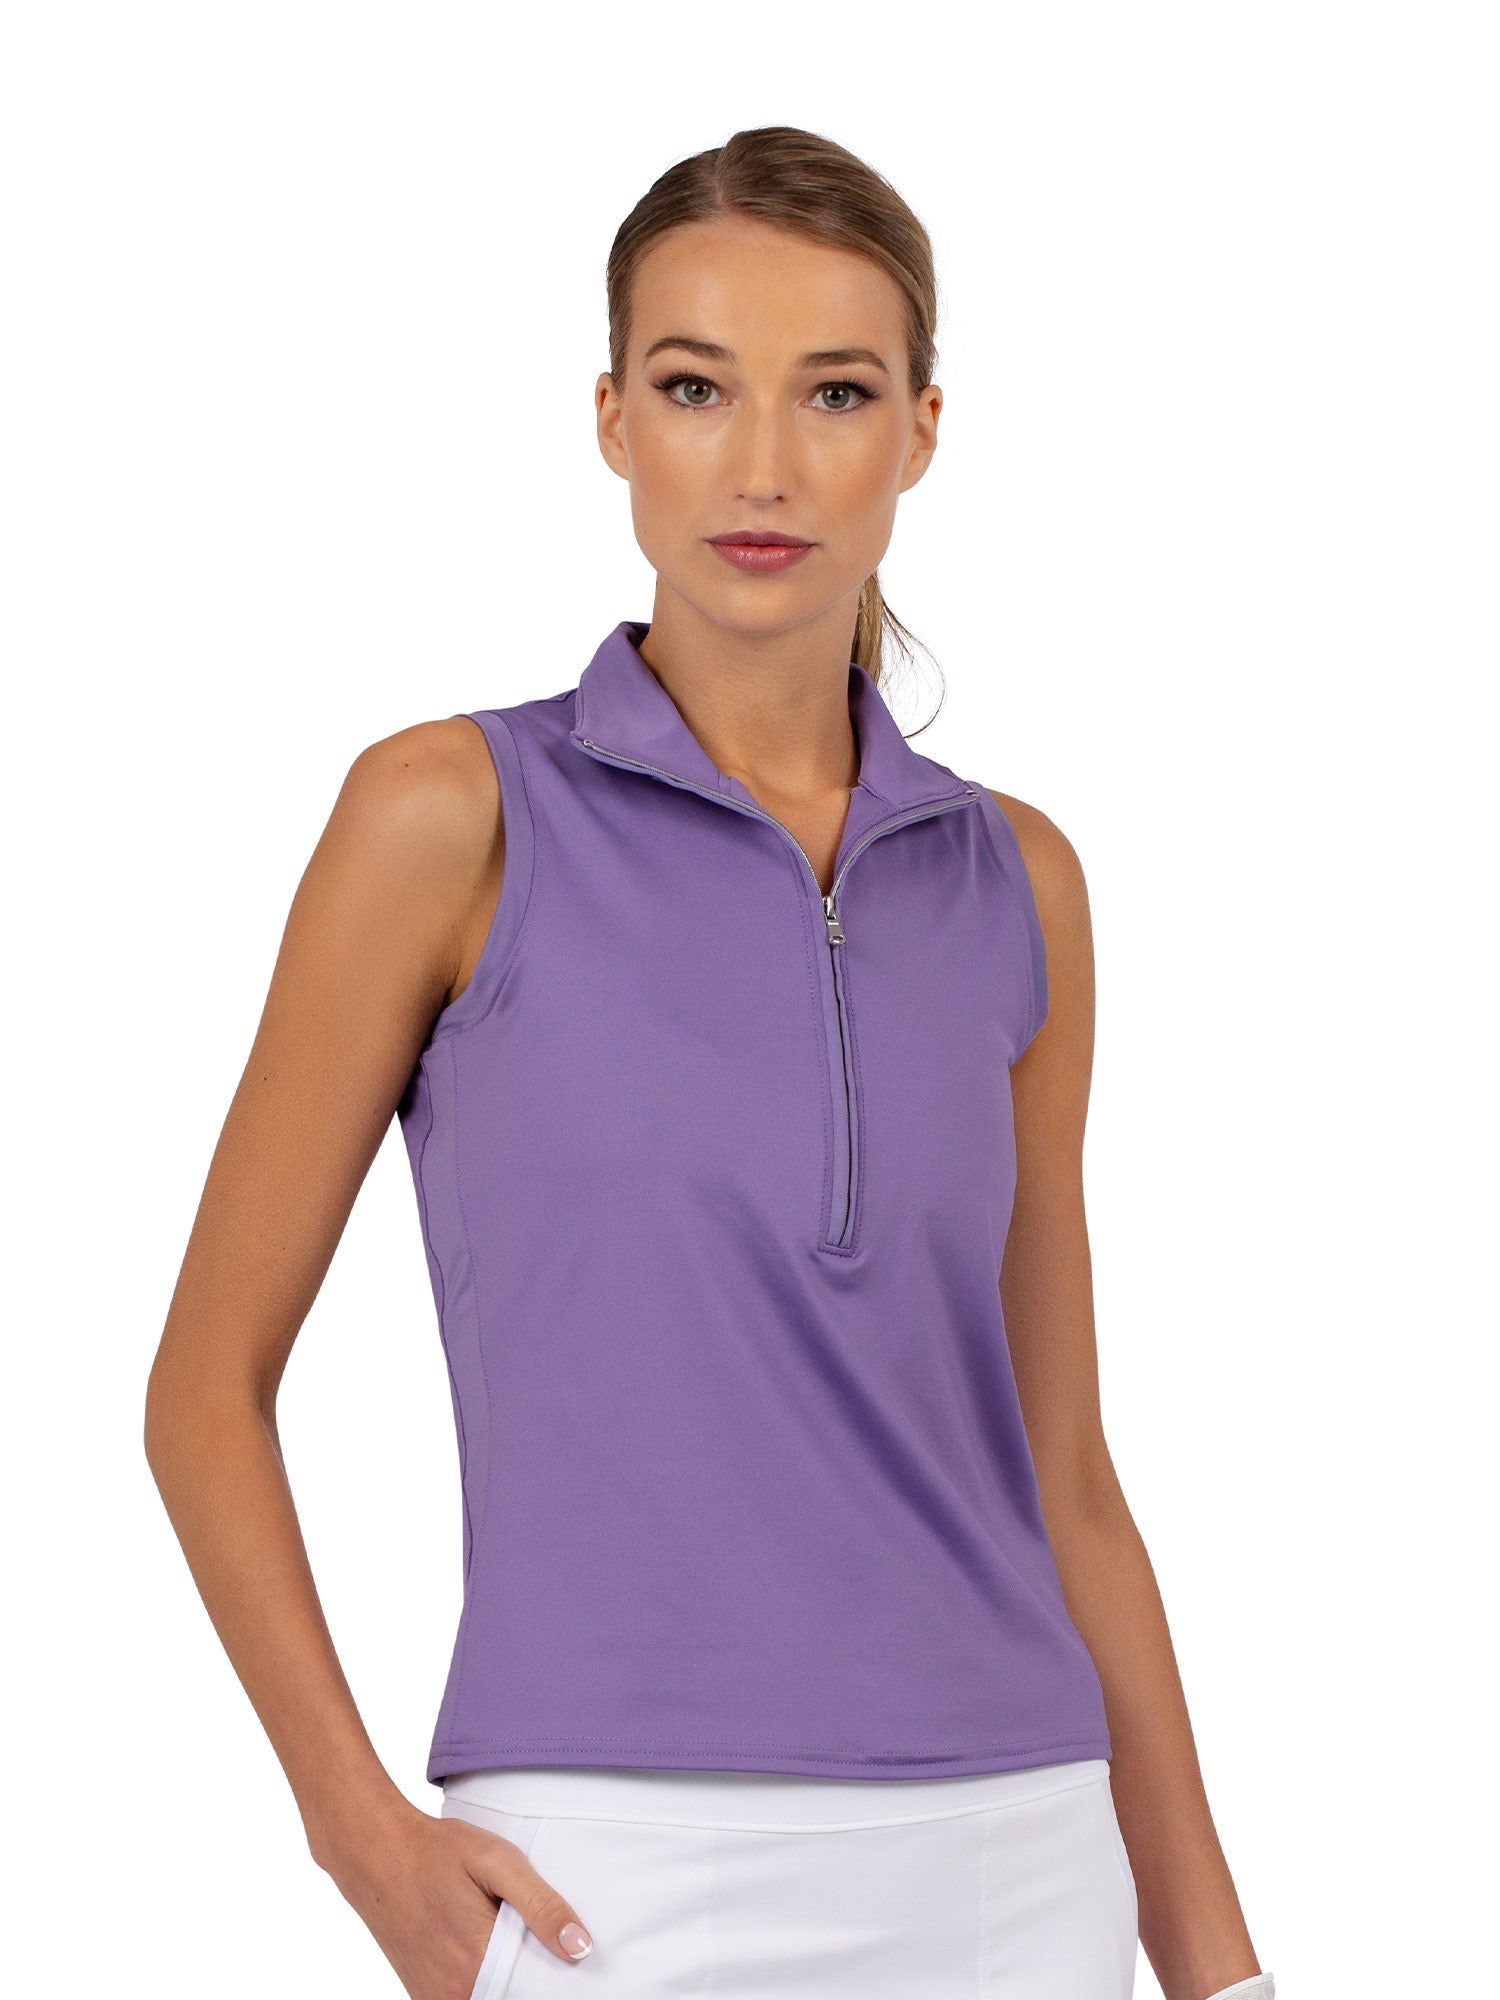 Front view of model wearing the Rhapsody quarter zip sleeveless top in lavender by inPhorm NYC with one hand in her pocket